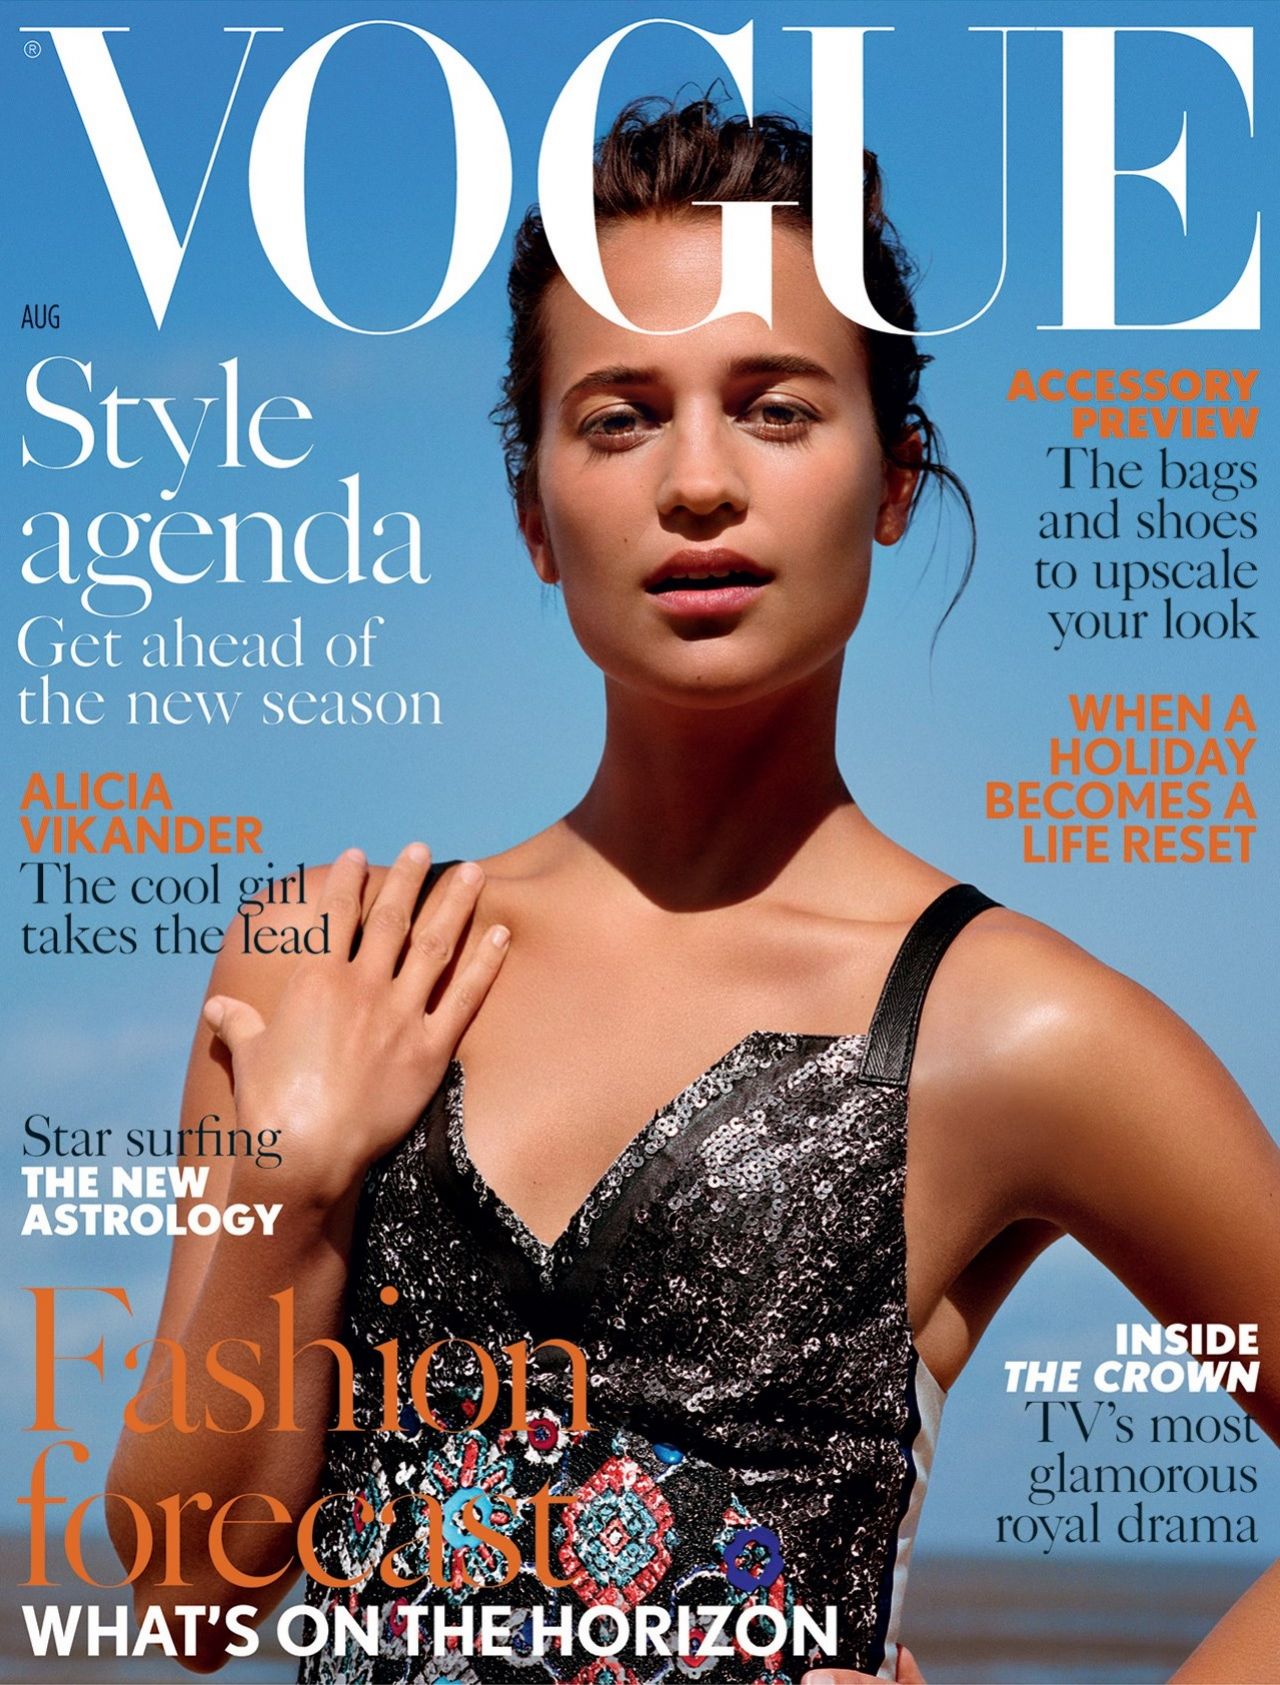 alicia-vikander-vogue-uk-august-2016-cover-and-photos-2